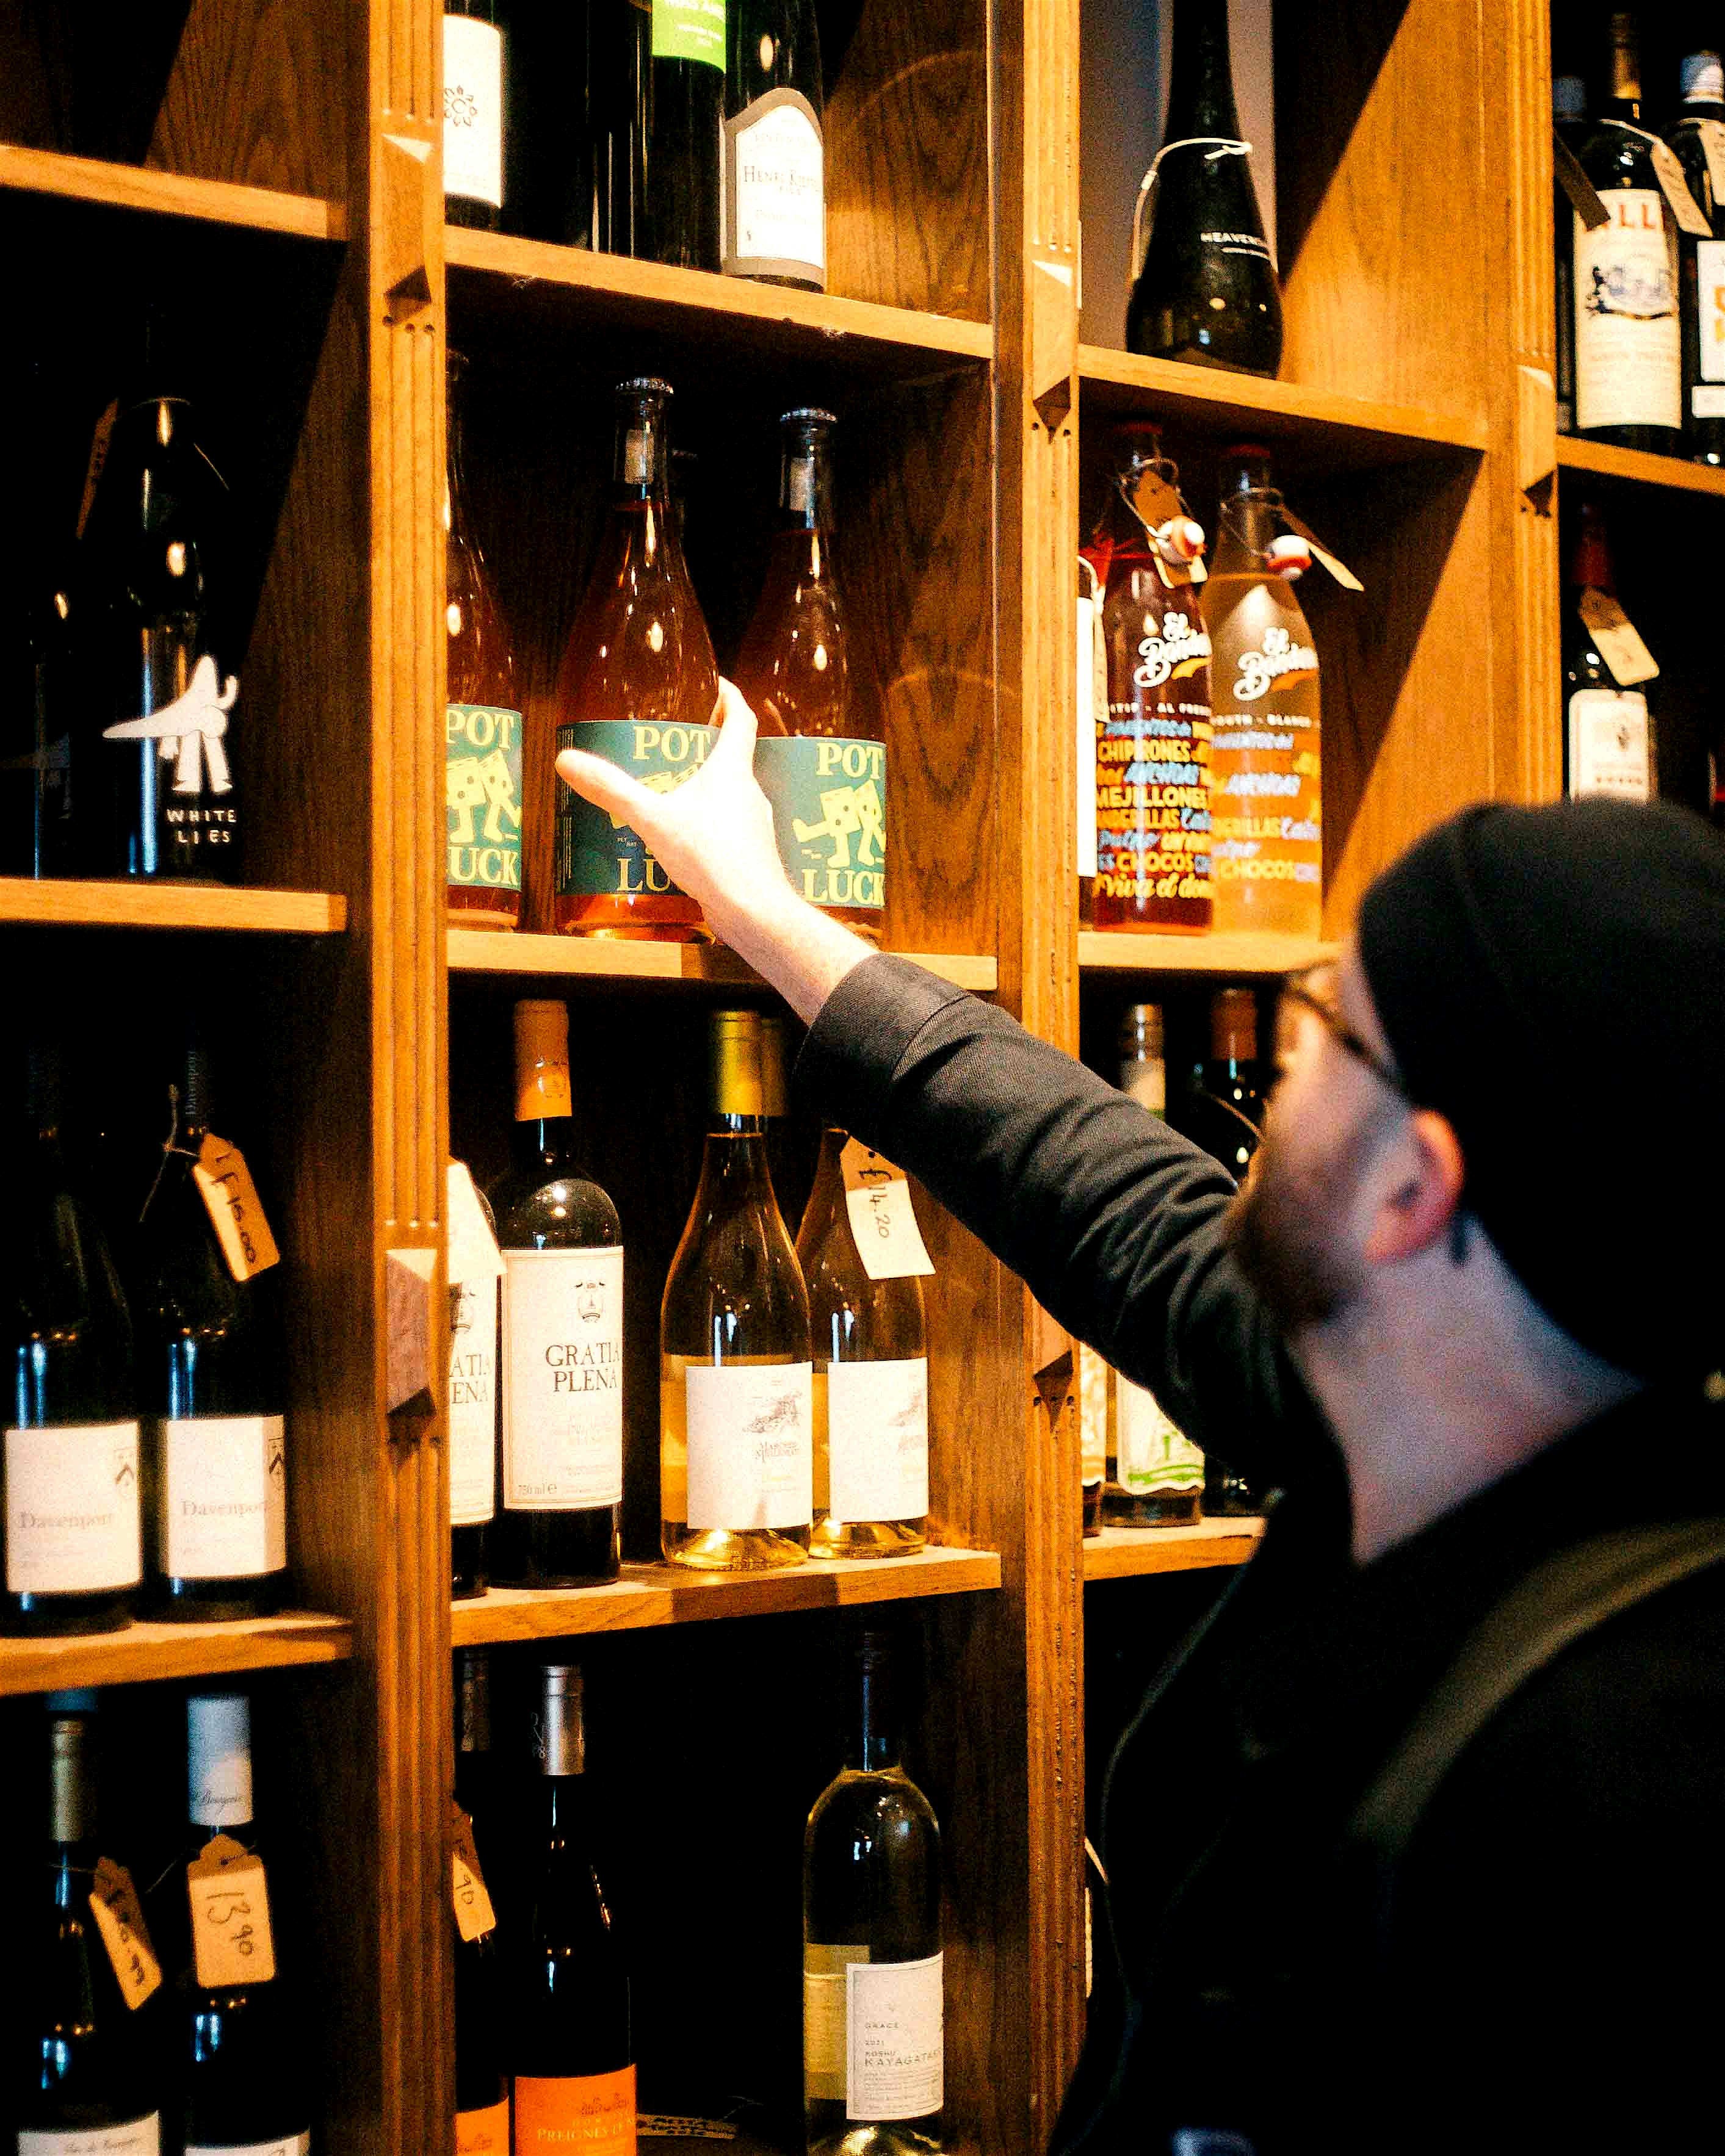 Man reaches on a high shelf for a bottle of wine in Shoreditch